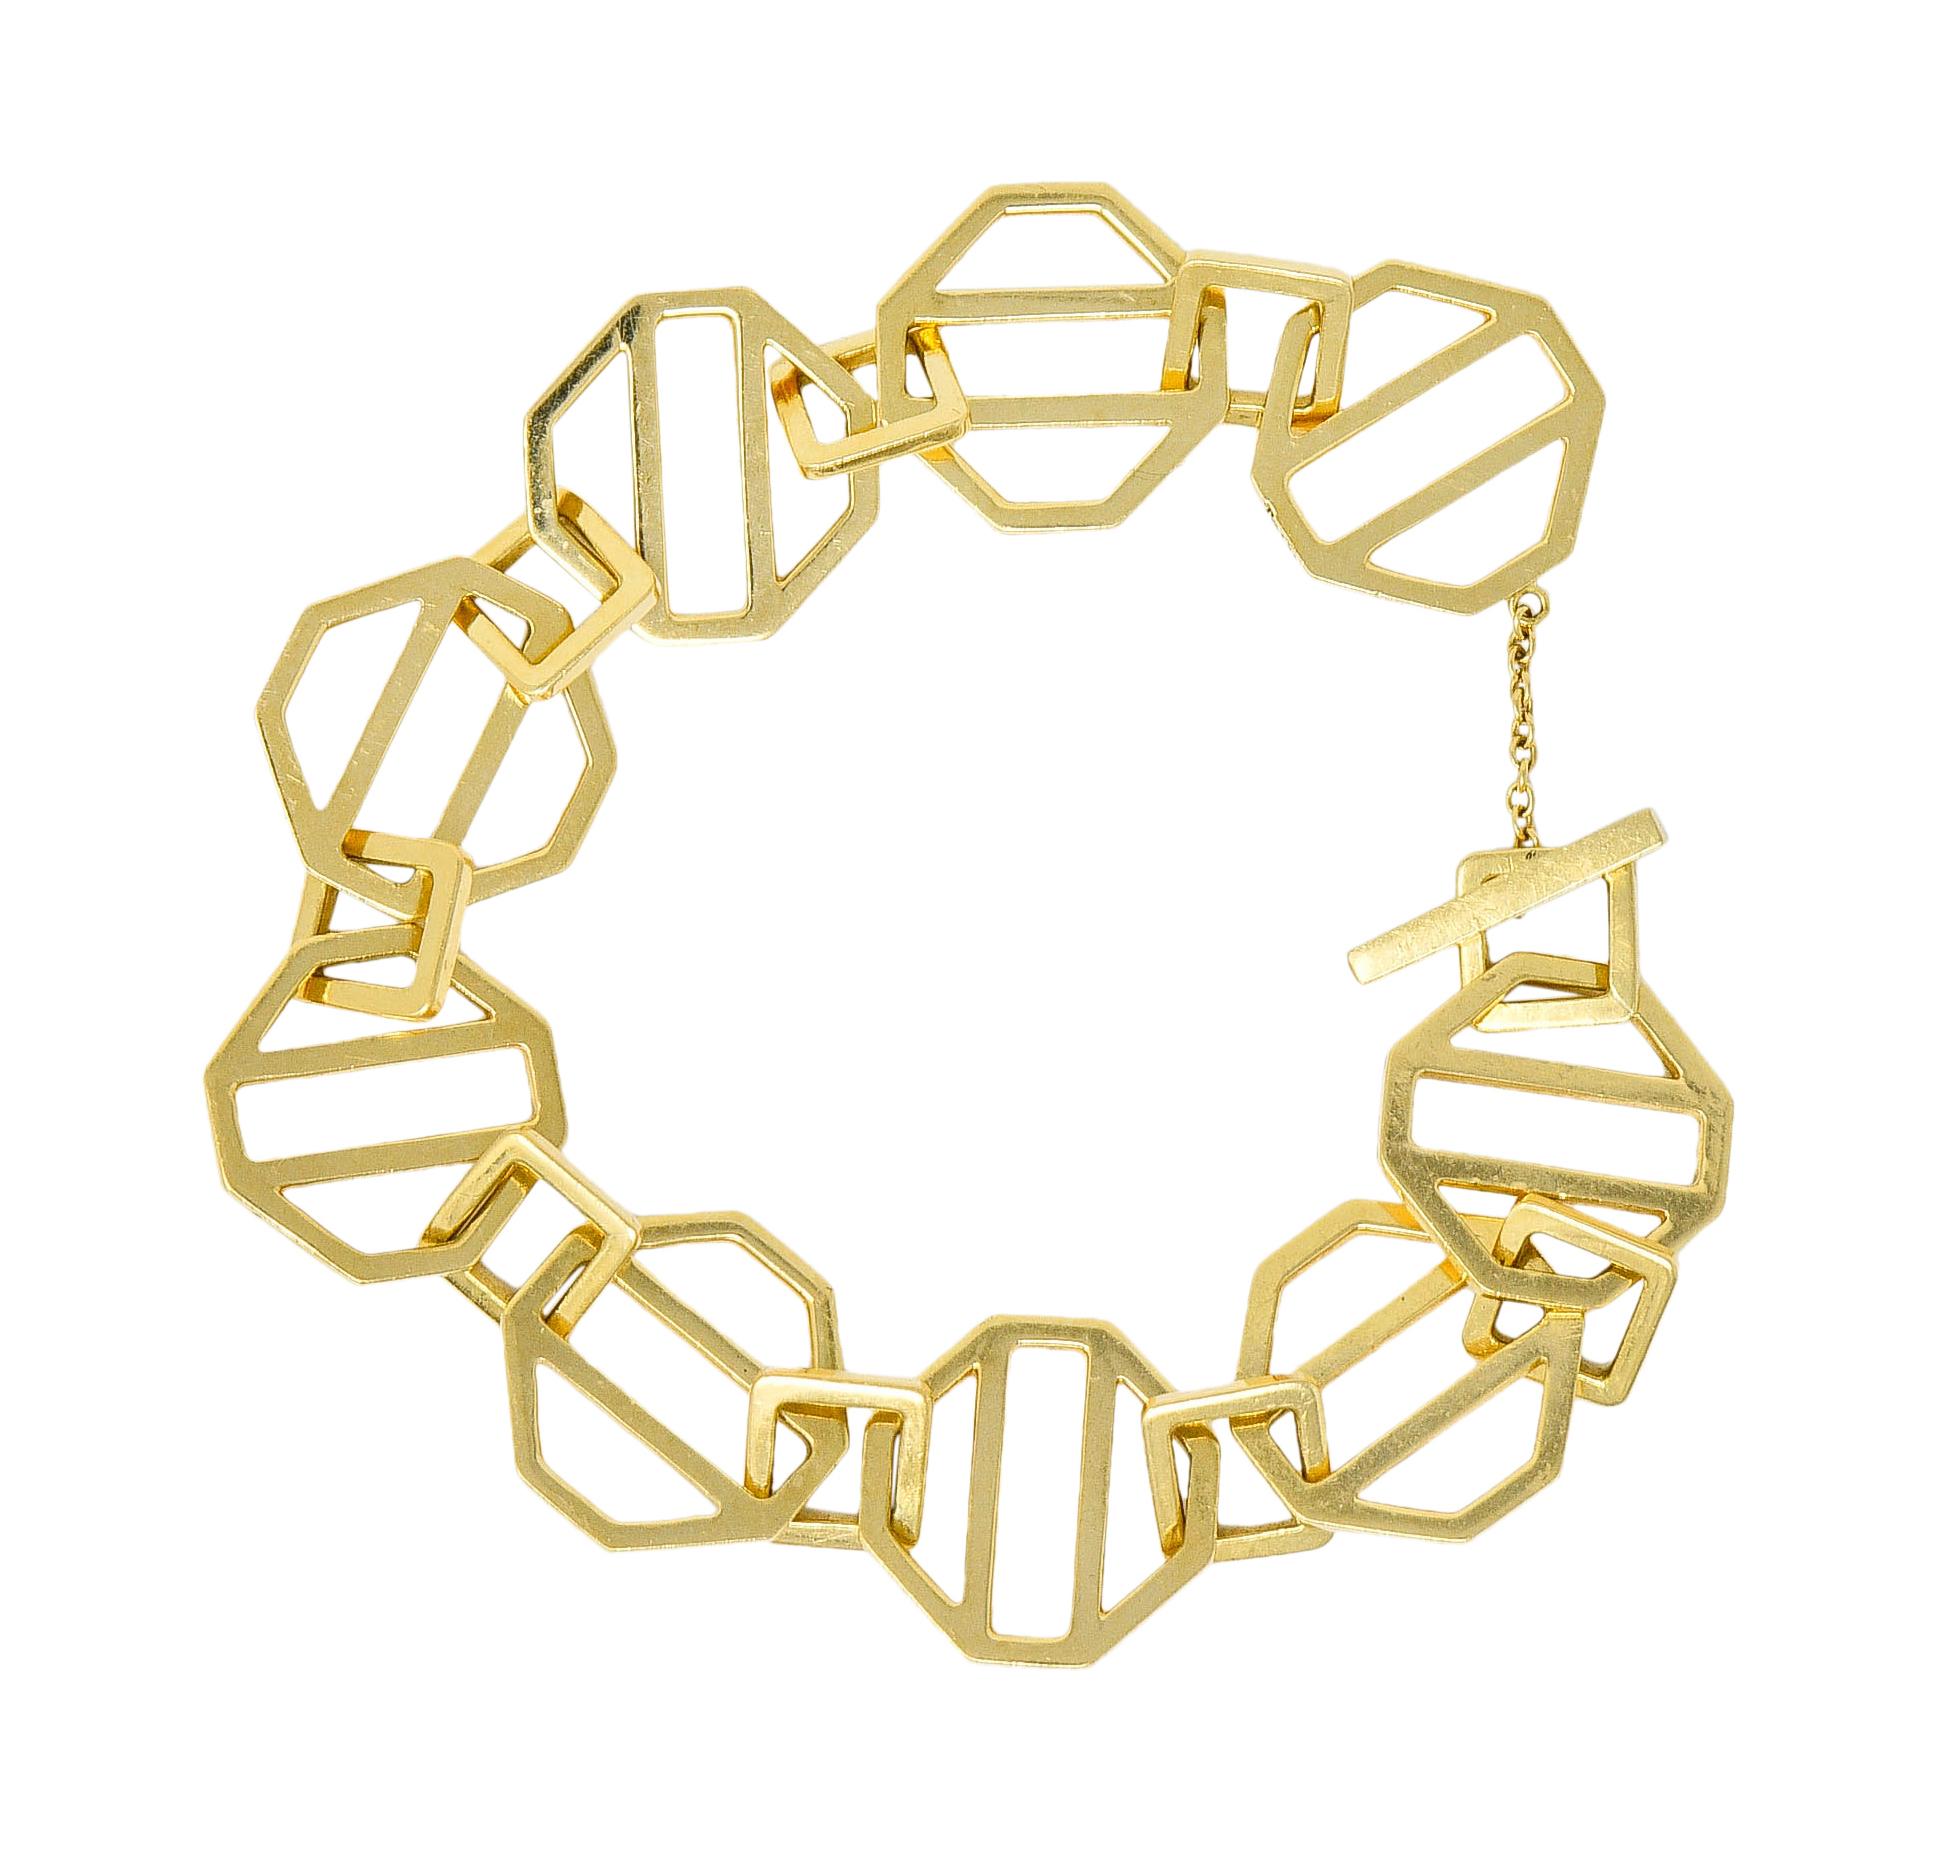 Bracelet is comprised of striated octagonal links

Alternating with smaller square cushion spacer links

Completes at a bar toggle clasp with safety chain

Signed Paloma Picasso and T & Co.

Stamped 750 for 18 karat gold

Circa: 1980s

Length: 7 1/2